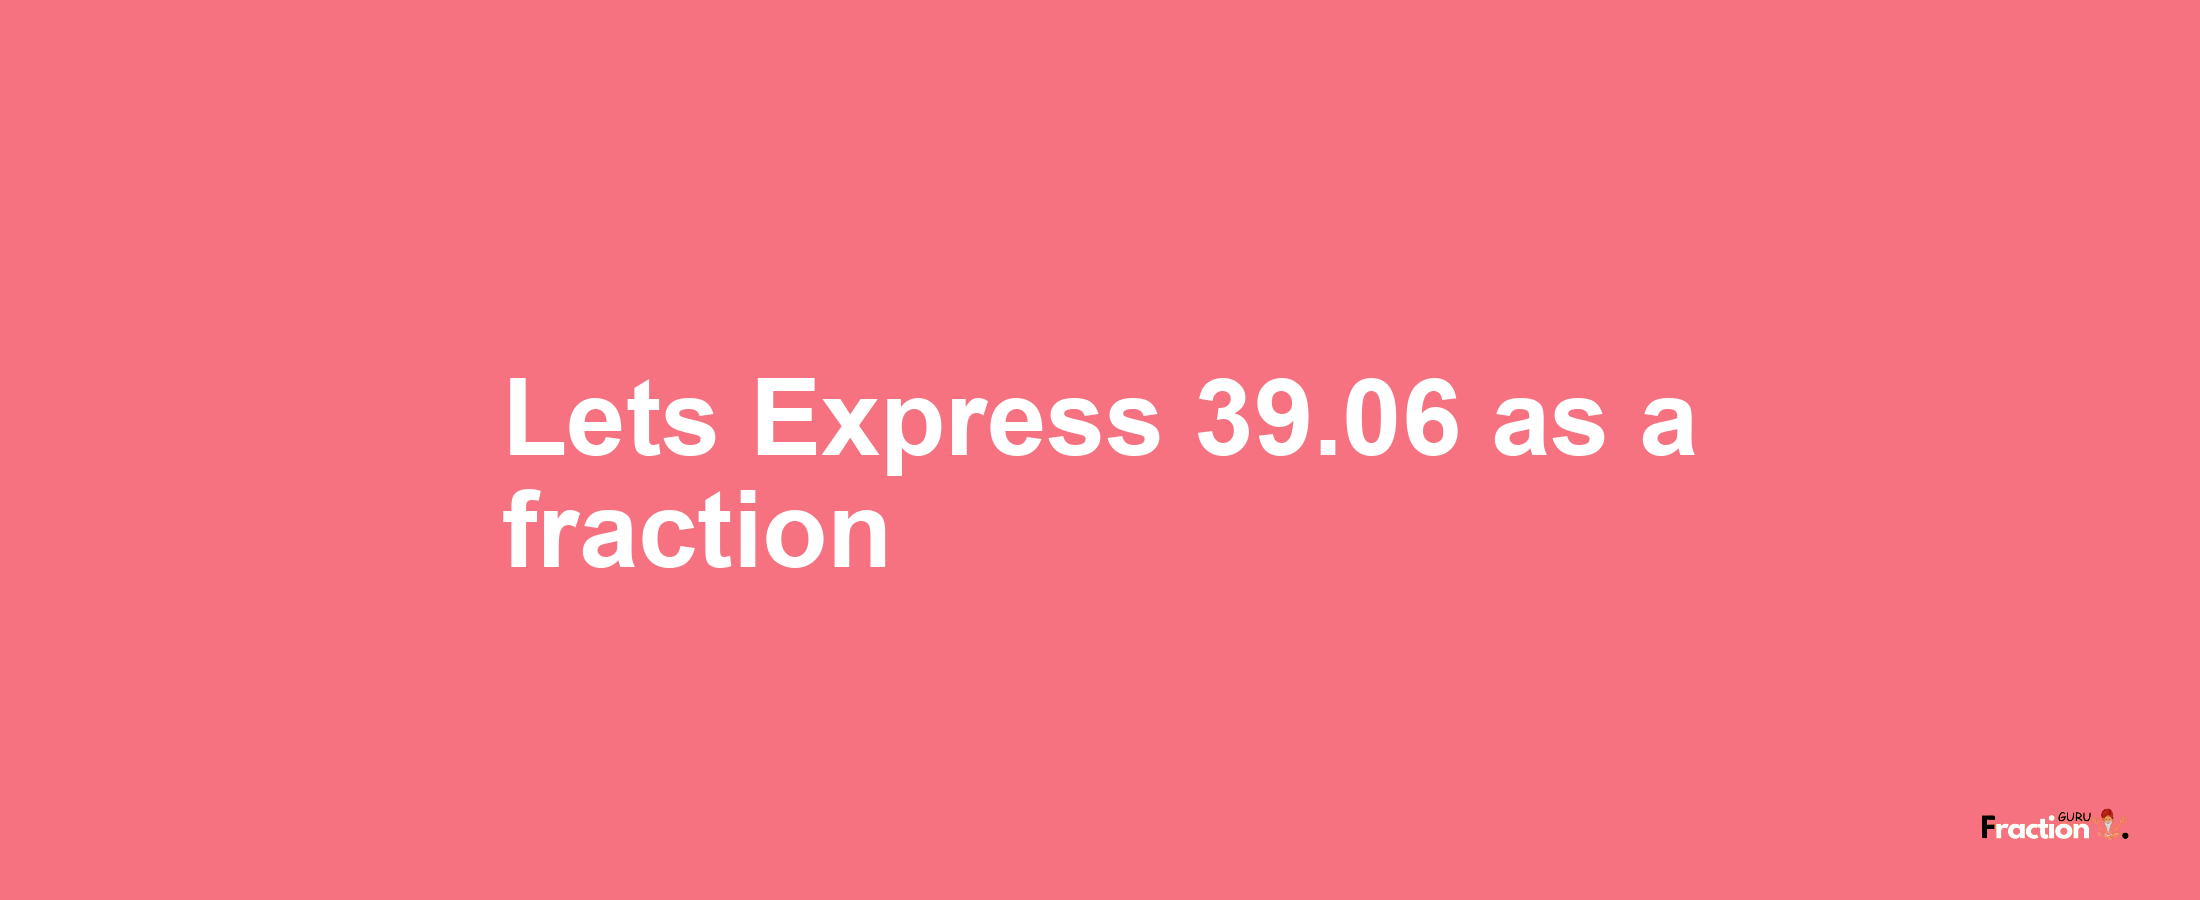 Lets Express 39.06 as afraction